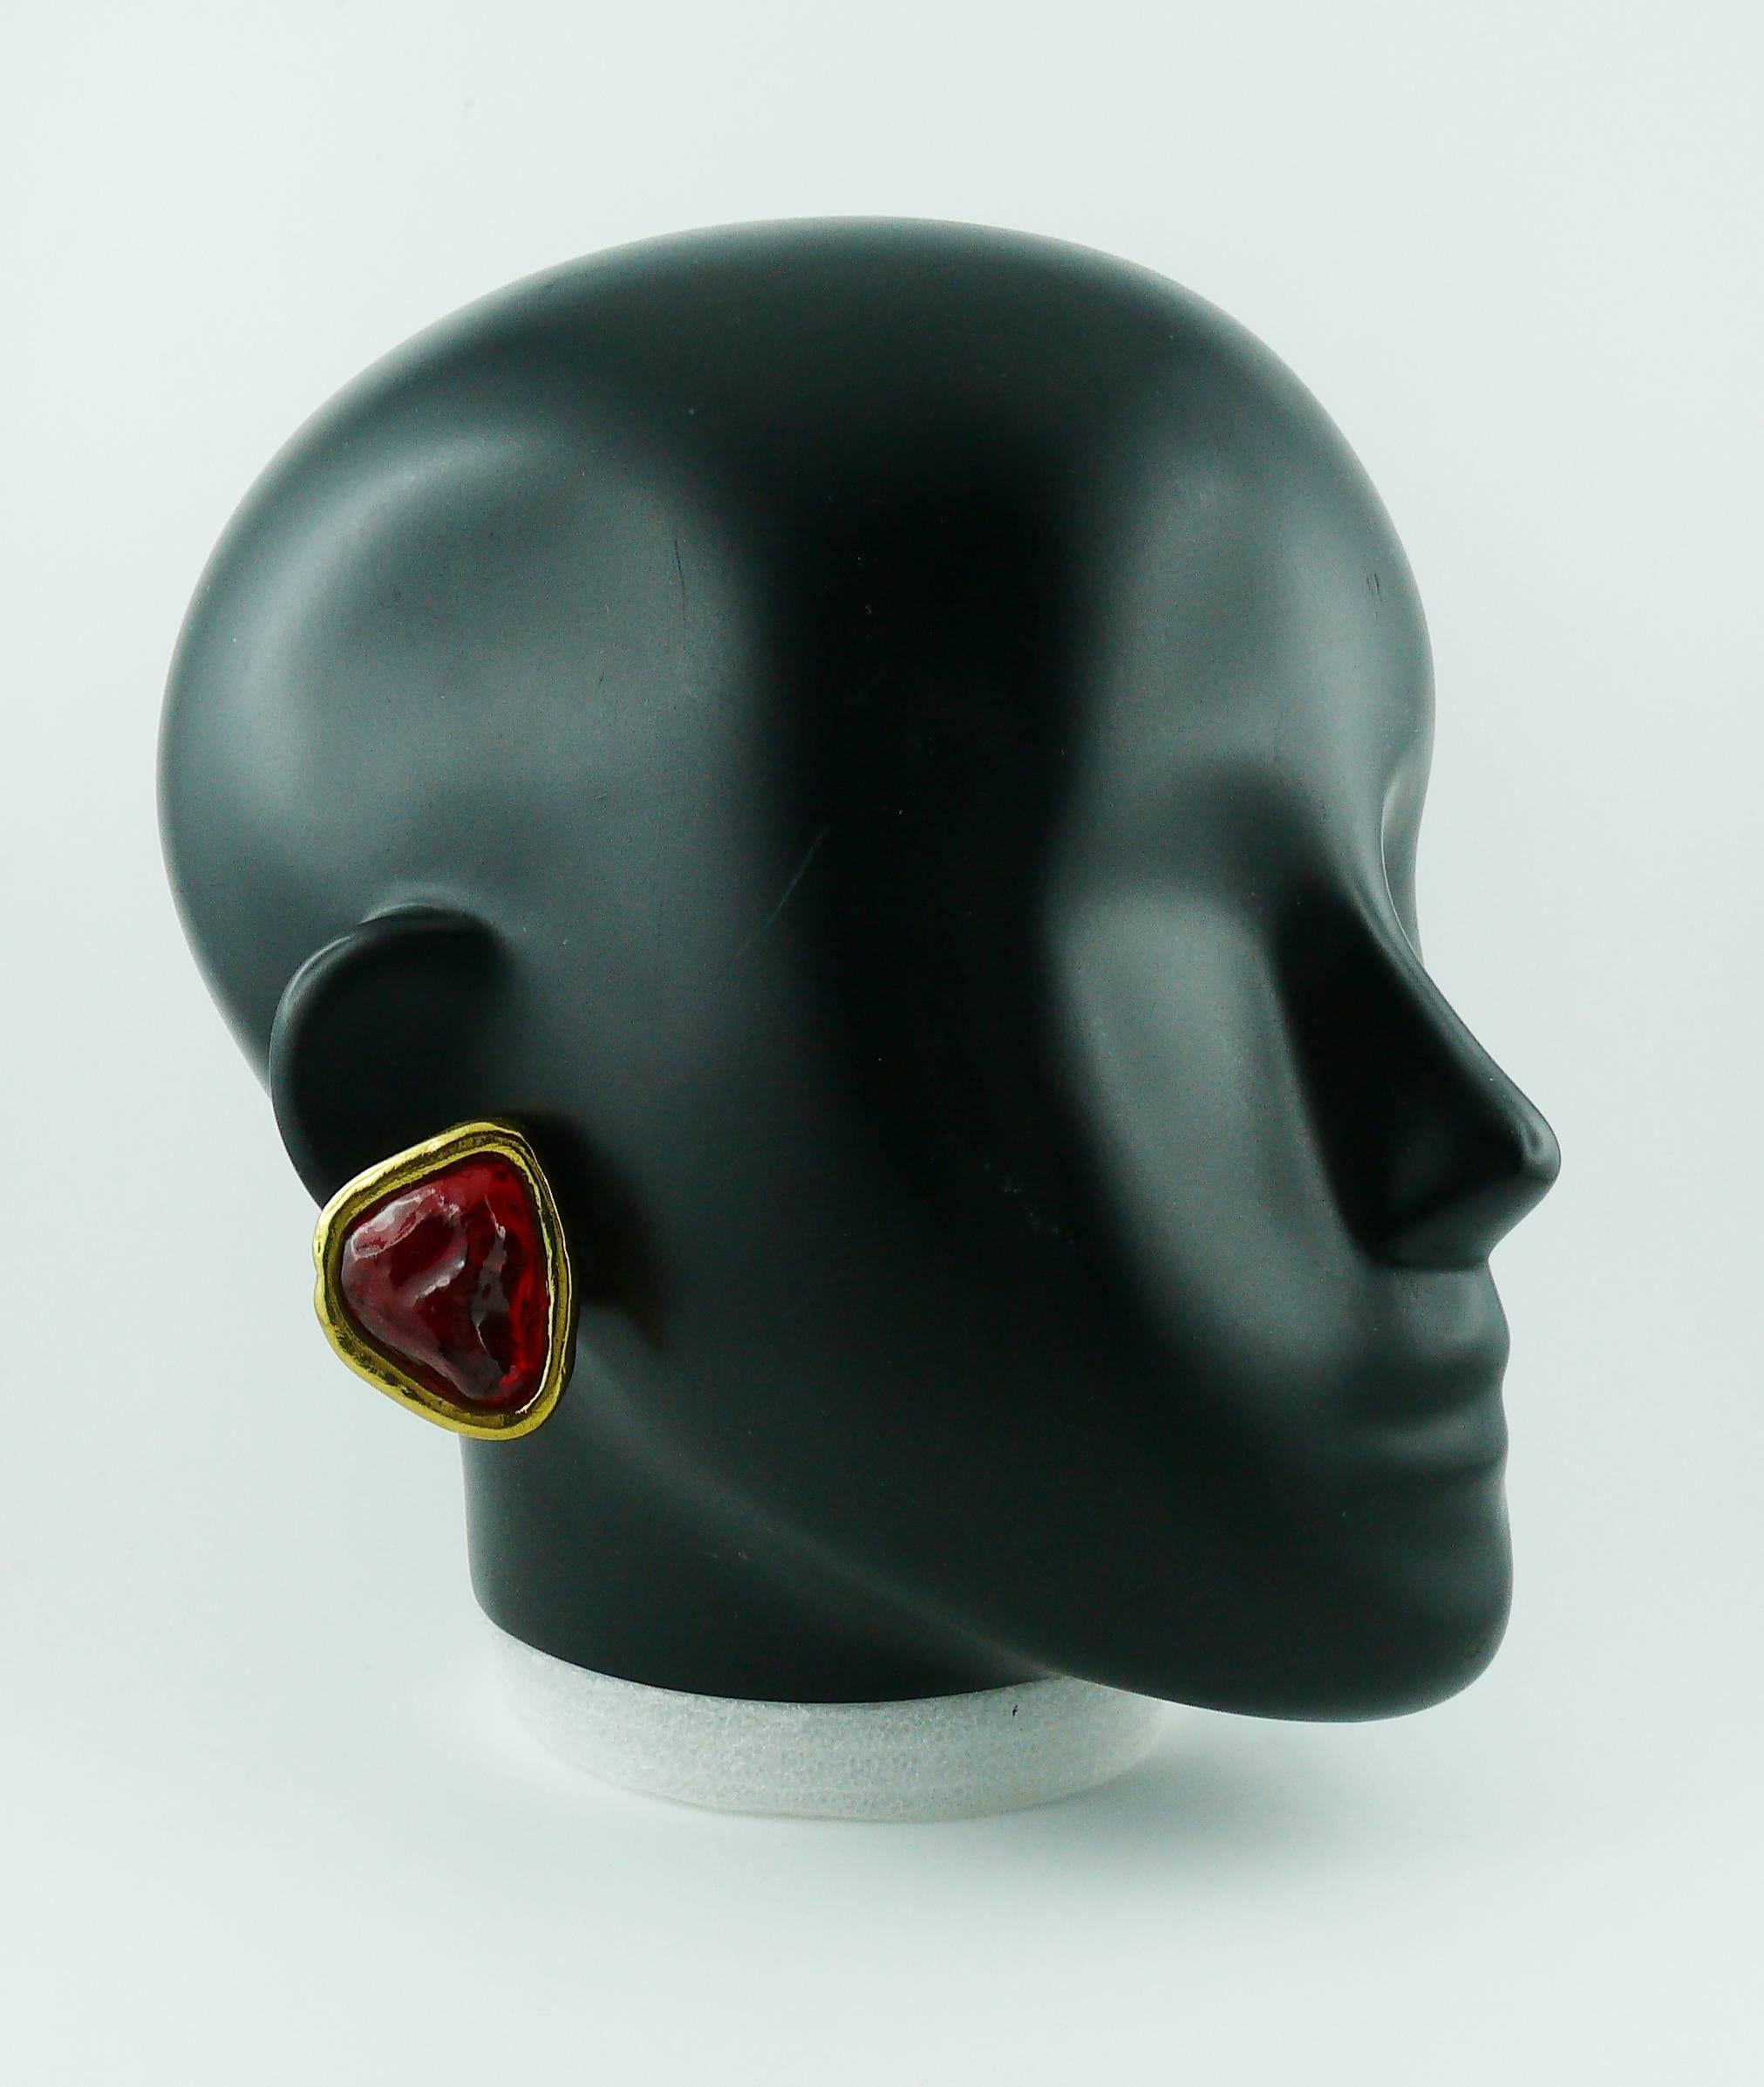 YVES SAINT LAURENT vintage massive clip-on earrings featuring a large irregular ruby resin cabochon in a gold toned setting.

Embossed YSL Made in France.

Indicative measurements : max. height approx. 3.9 cm (1.54 inches) / max. width approx. 3.3